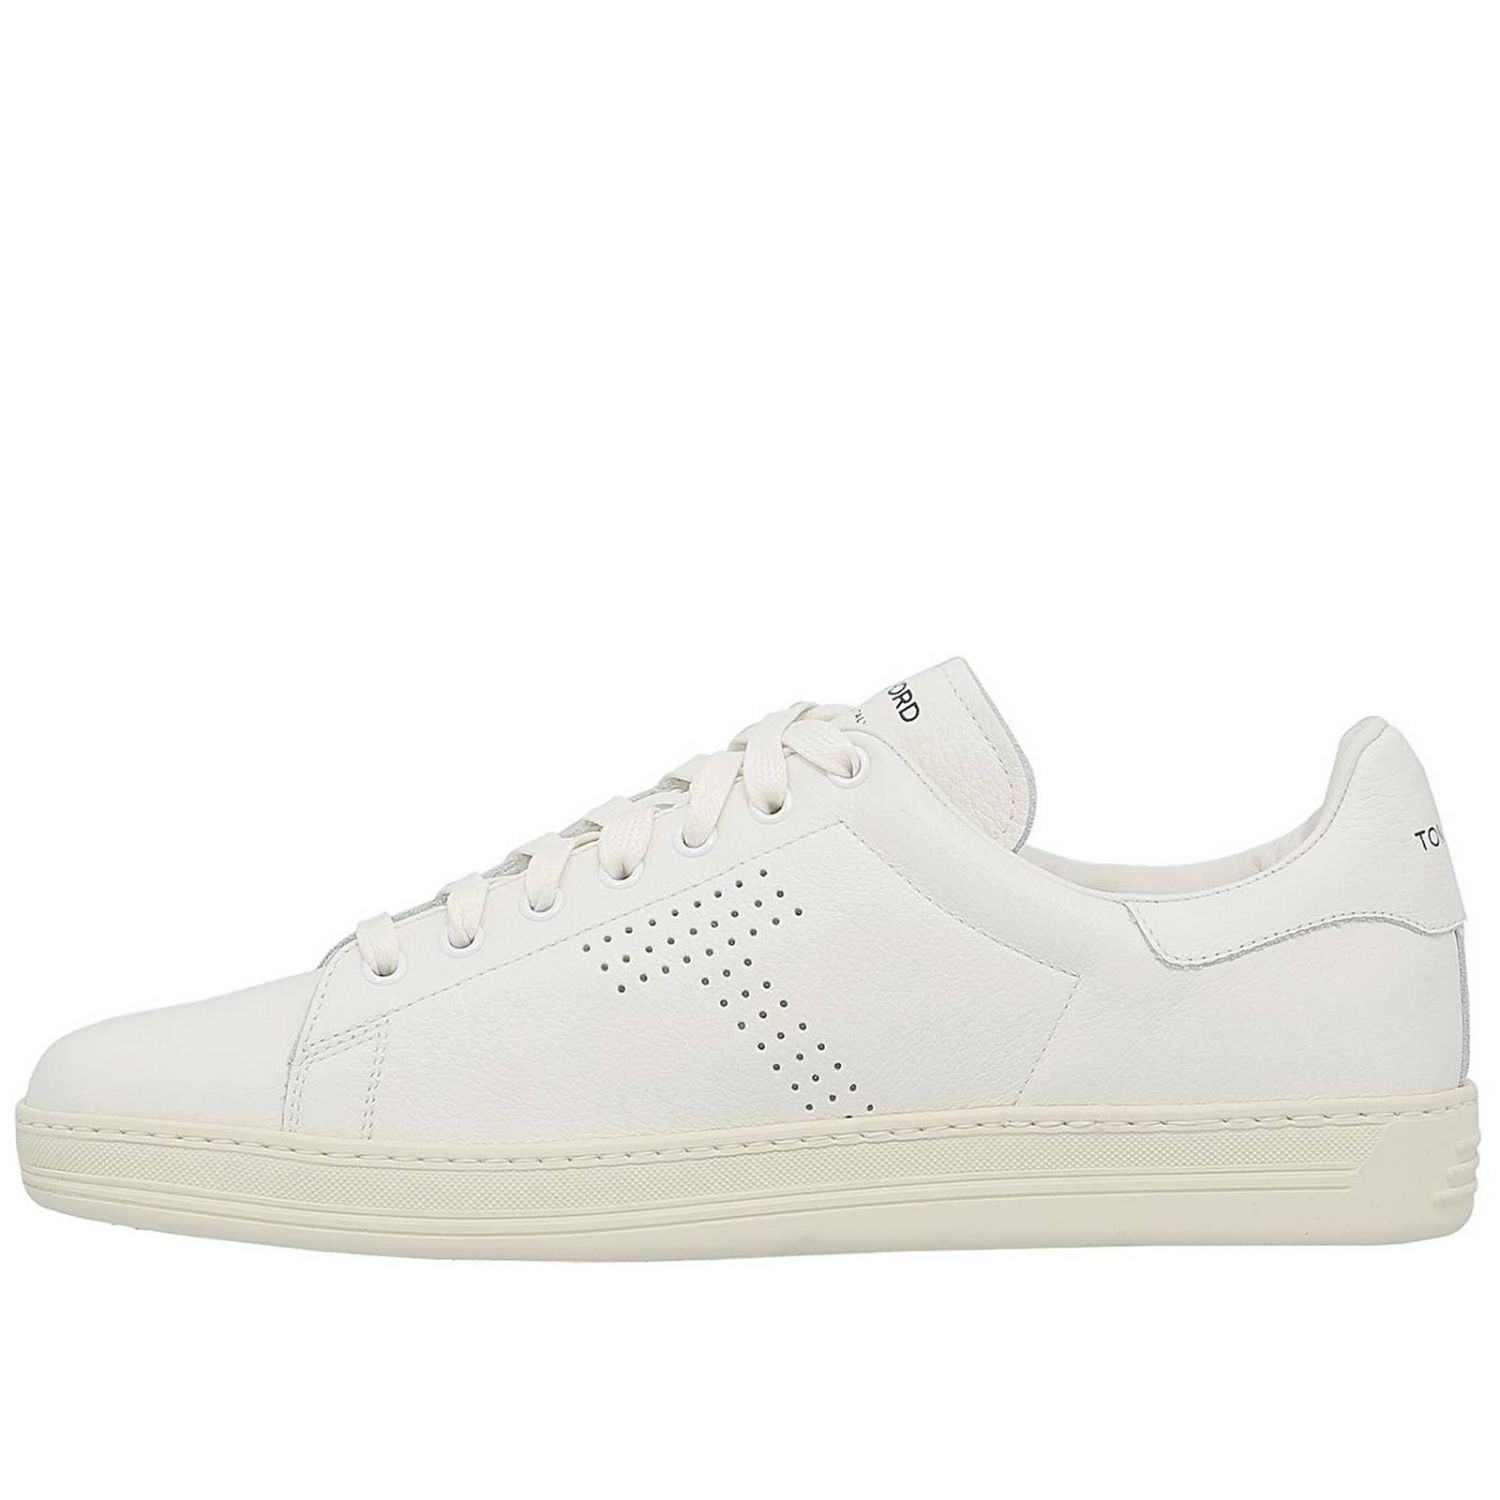 Tom Ford Outlet: Trainers men | Trainers Tom Ford Men White 